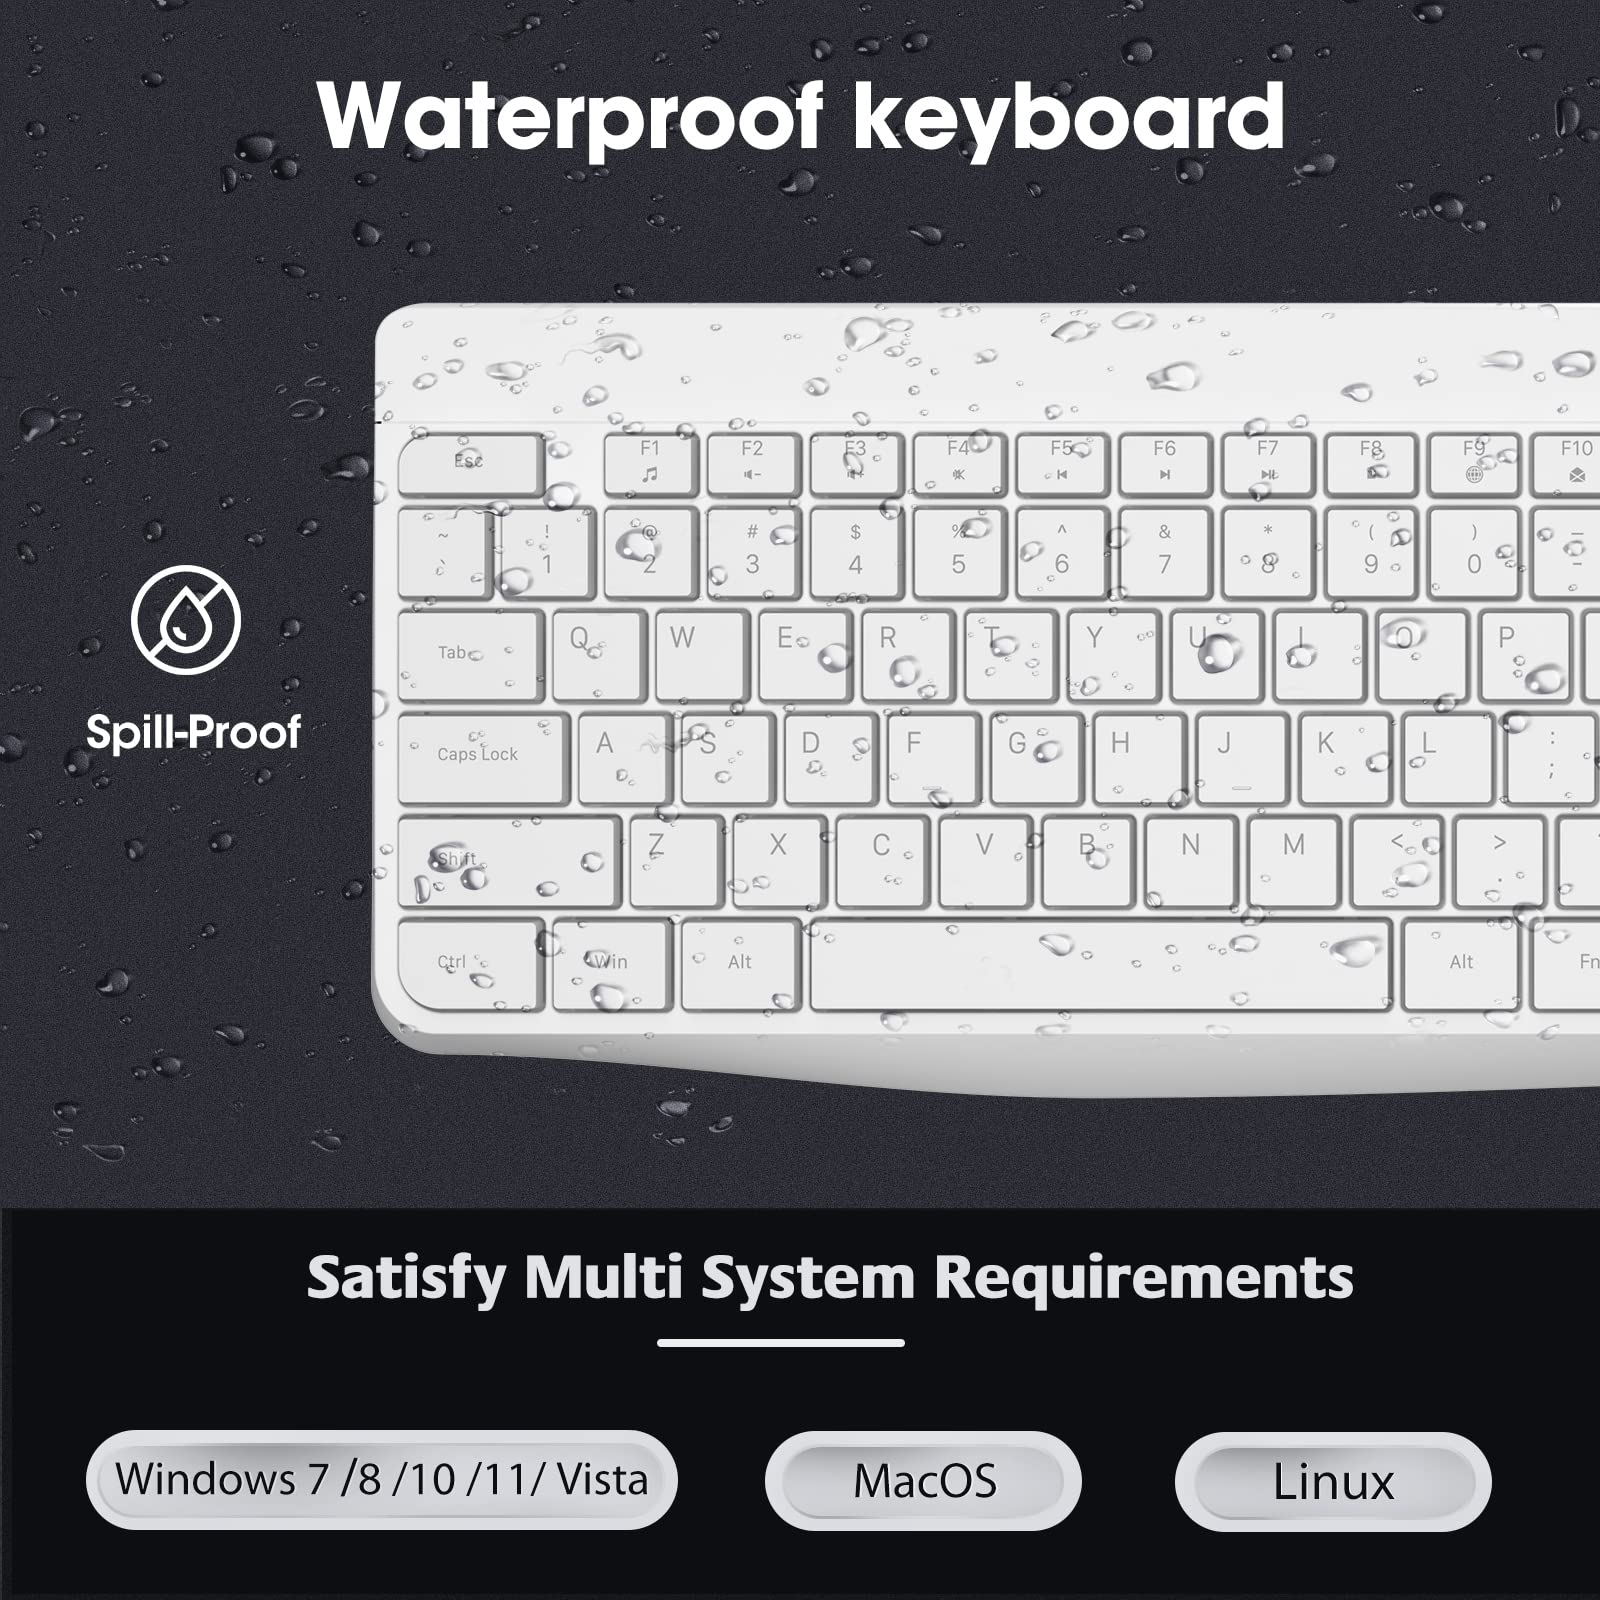 KOORUI Wireless Keyboard and Mouse Combos, 2.4G Silent Full Size Keyboard 3DPI Mouse for Windows MacOS Linux, 12 Multimedia and Shortcut Keys Desktop Computer/Laptop/PC-White (Battery Not Included)